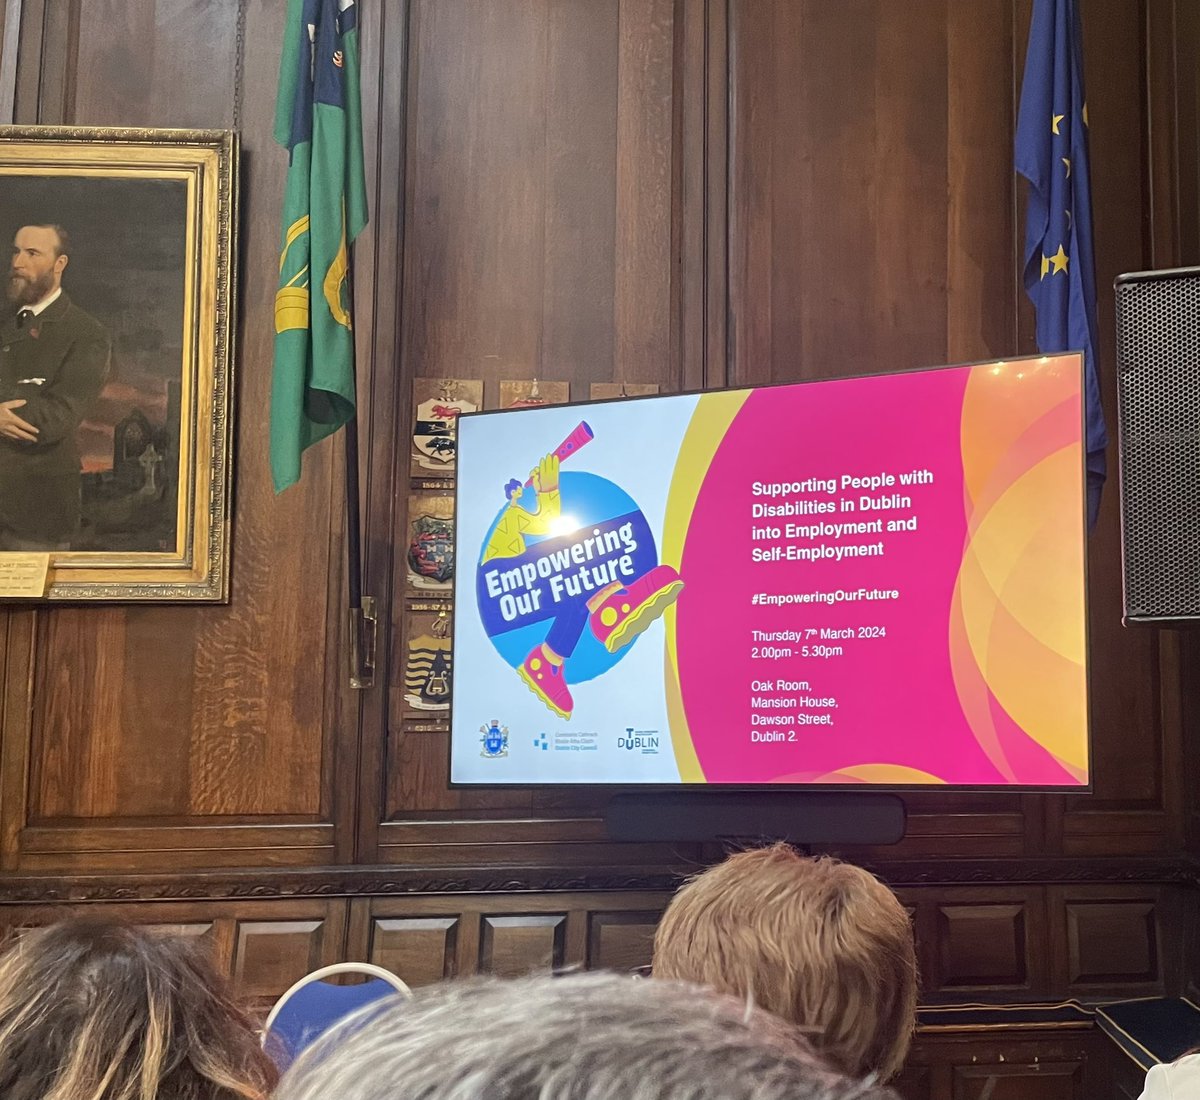 Delighted to be attending today’s 
#EmpoweringOurFuture event in the Mansion House on supporting people with disabilities into employment and self-employment.